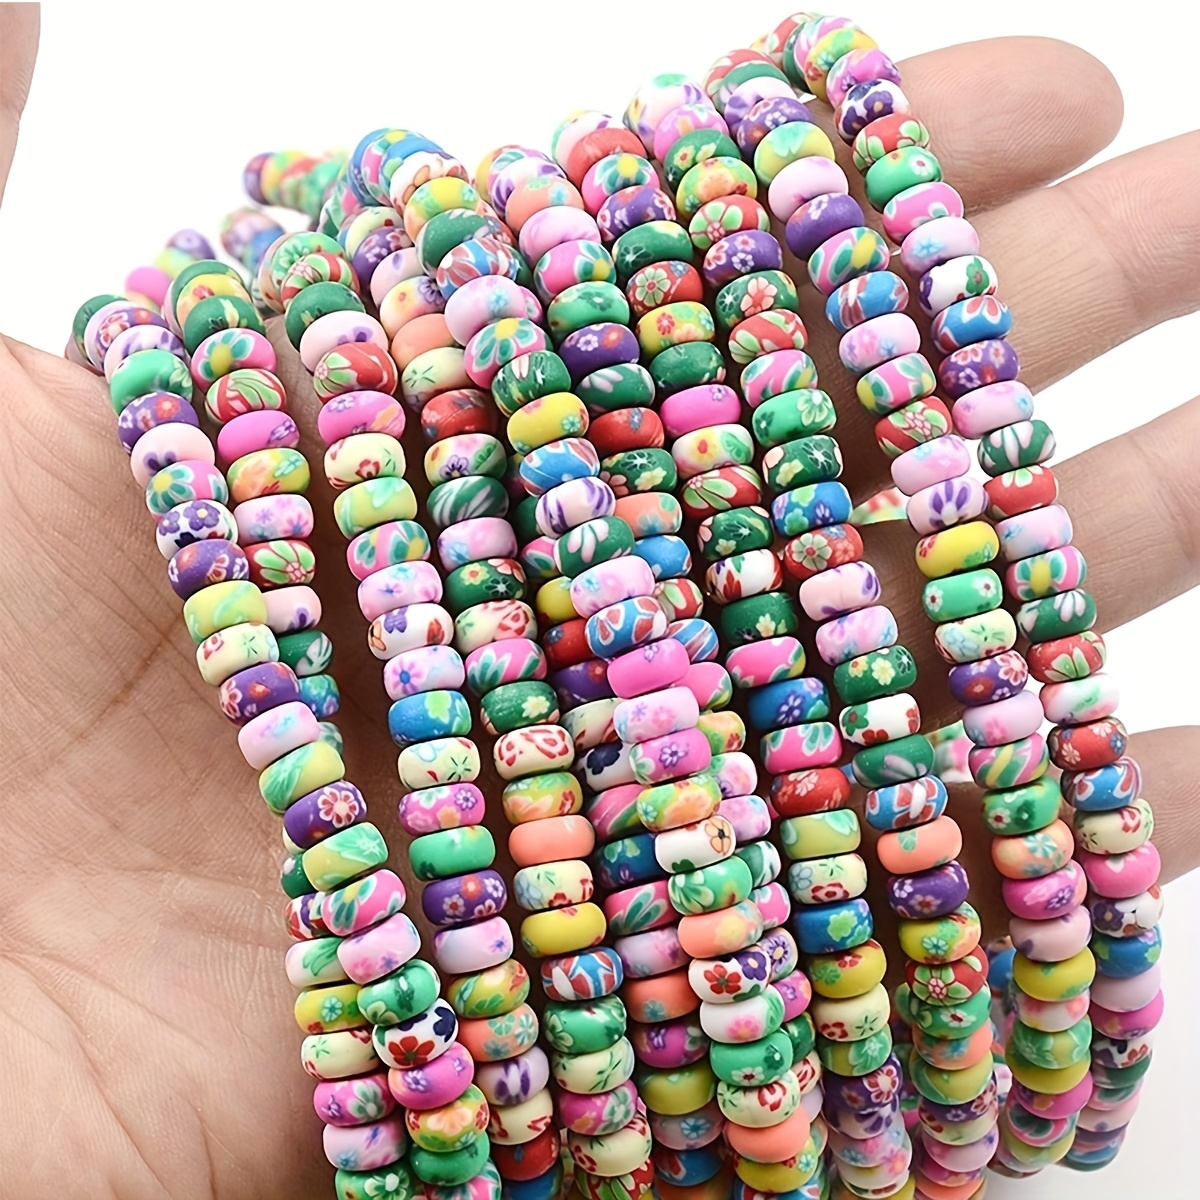 20Pcs/Lot Mixed Flower Shape Clay Beads 10mm Polymer Clay Spacer Beads For  Handmade Jewelry Making